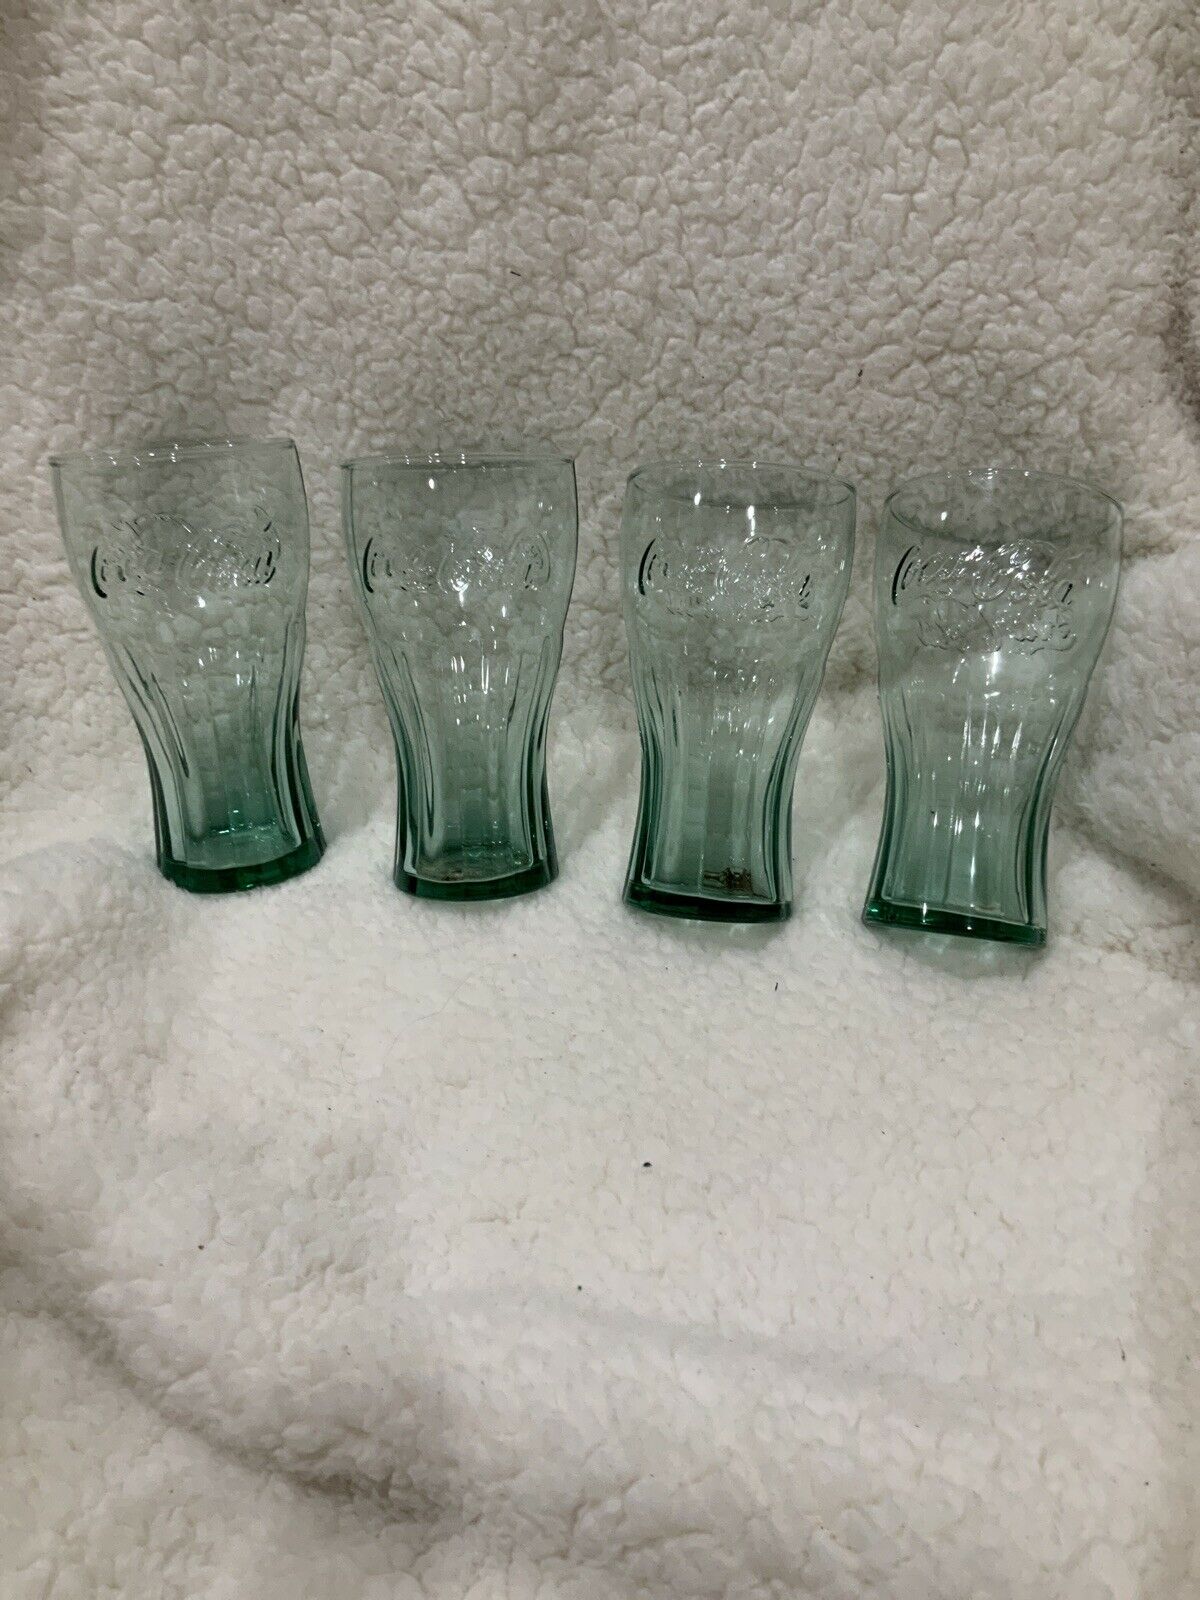 https://www.wideopencountry.com/wp-content/uploads/sites/4/eats/2020/08/Set-of-4-McDonalds-Coca-Cola-Coke-Green-Embossed-Drinking-Glasses-16-oz-.jpg?resize=1200%2C1600